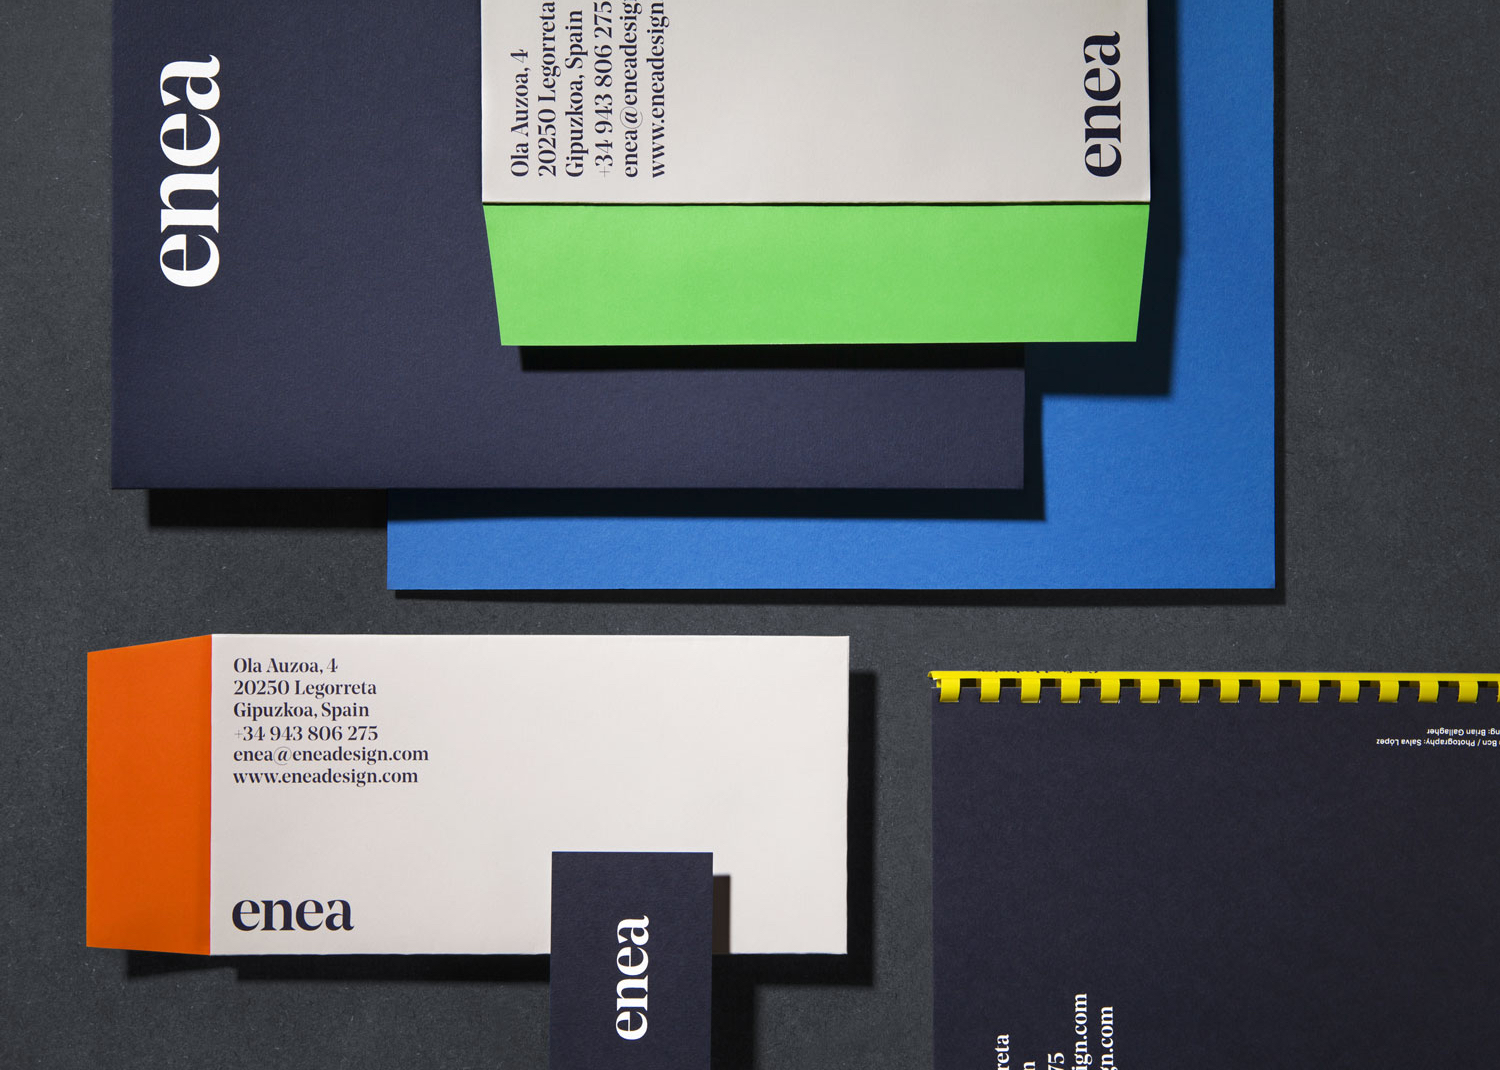 Branding for Furniture Designers, Manufacturers & Retailers – Enea by Clase bcn, Spain